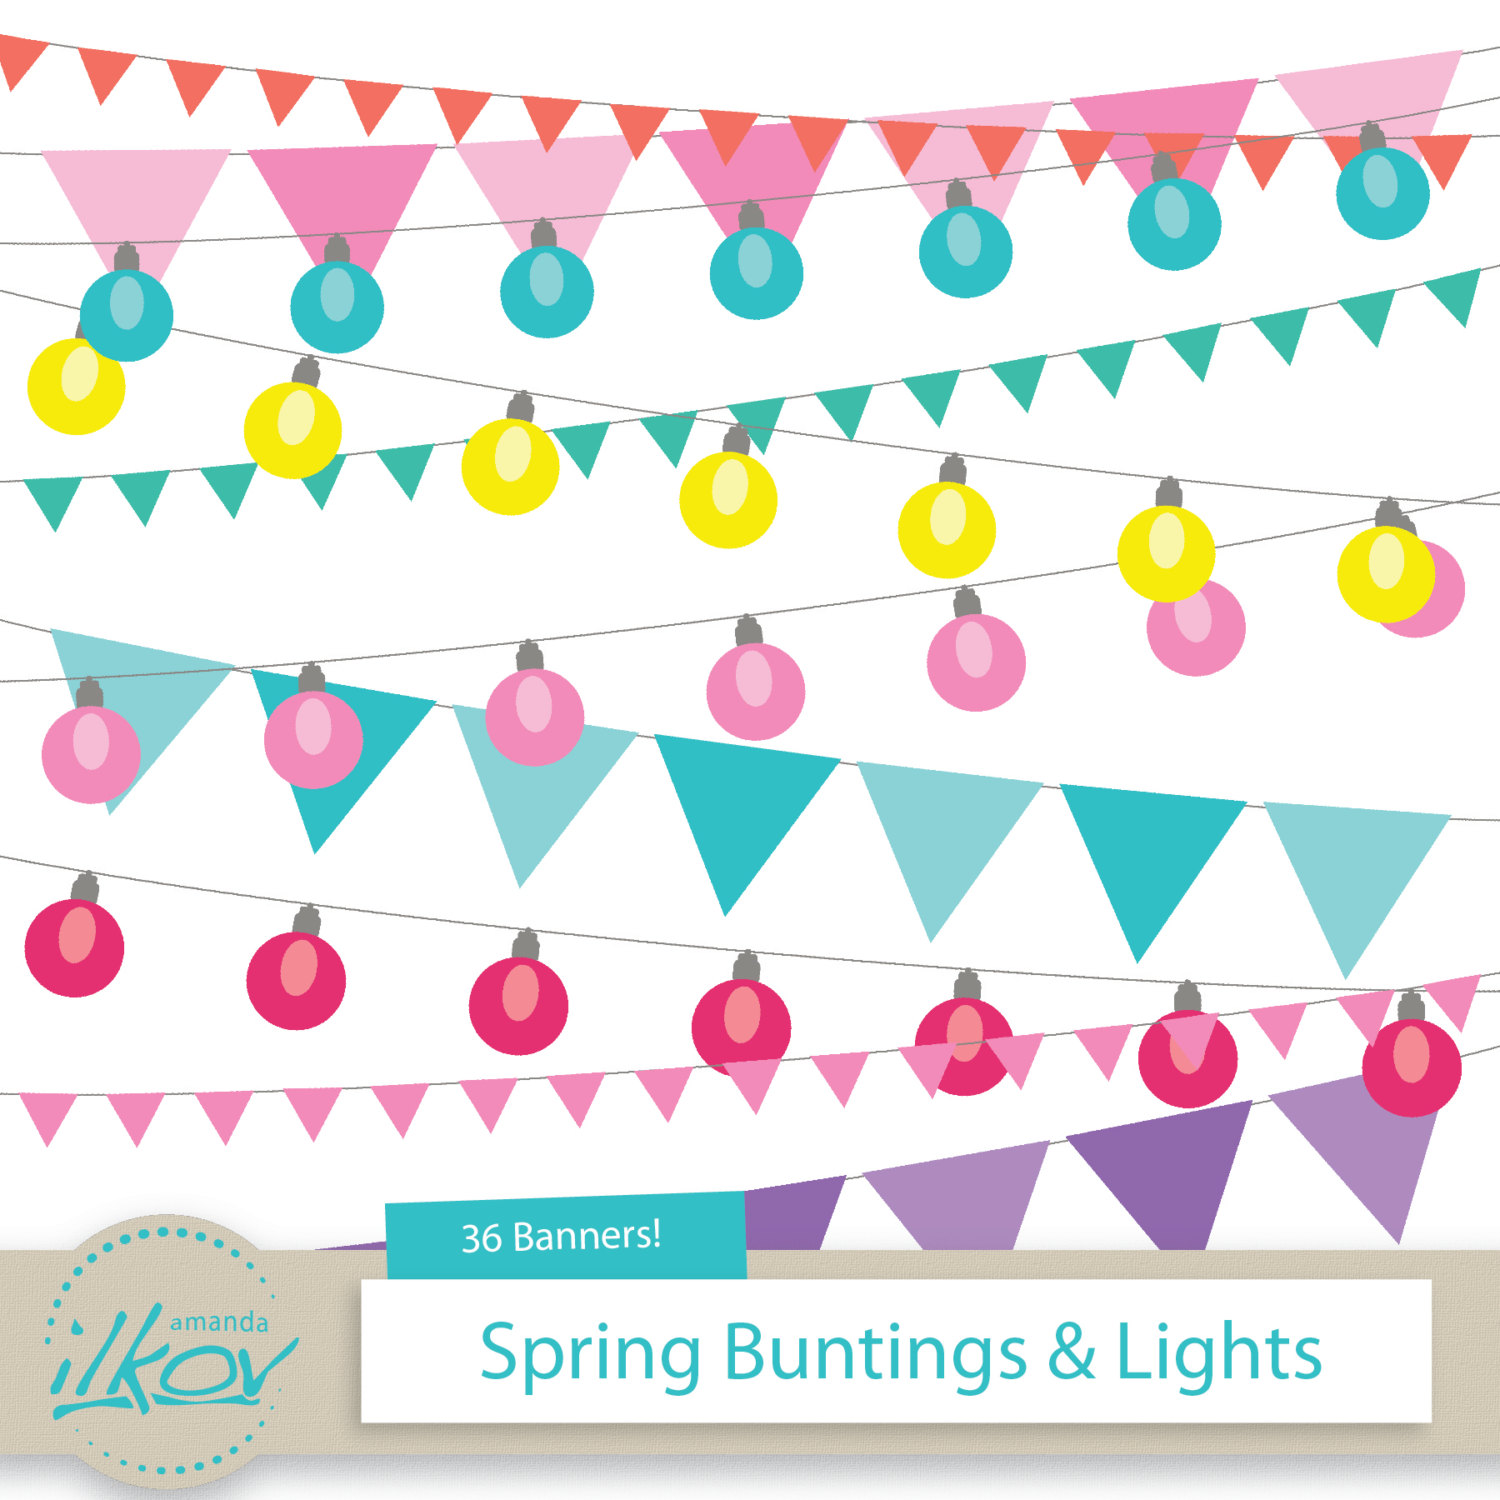 Spring Patio Lights   Bunting Banners Clipart For By Amandailkov